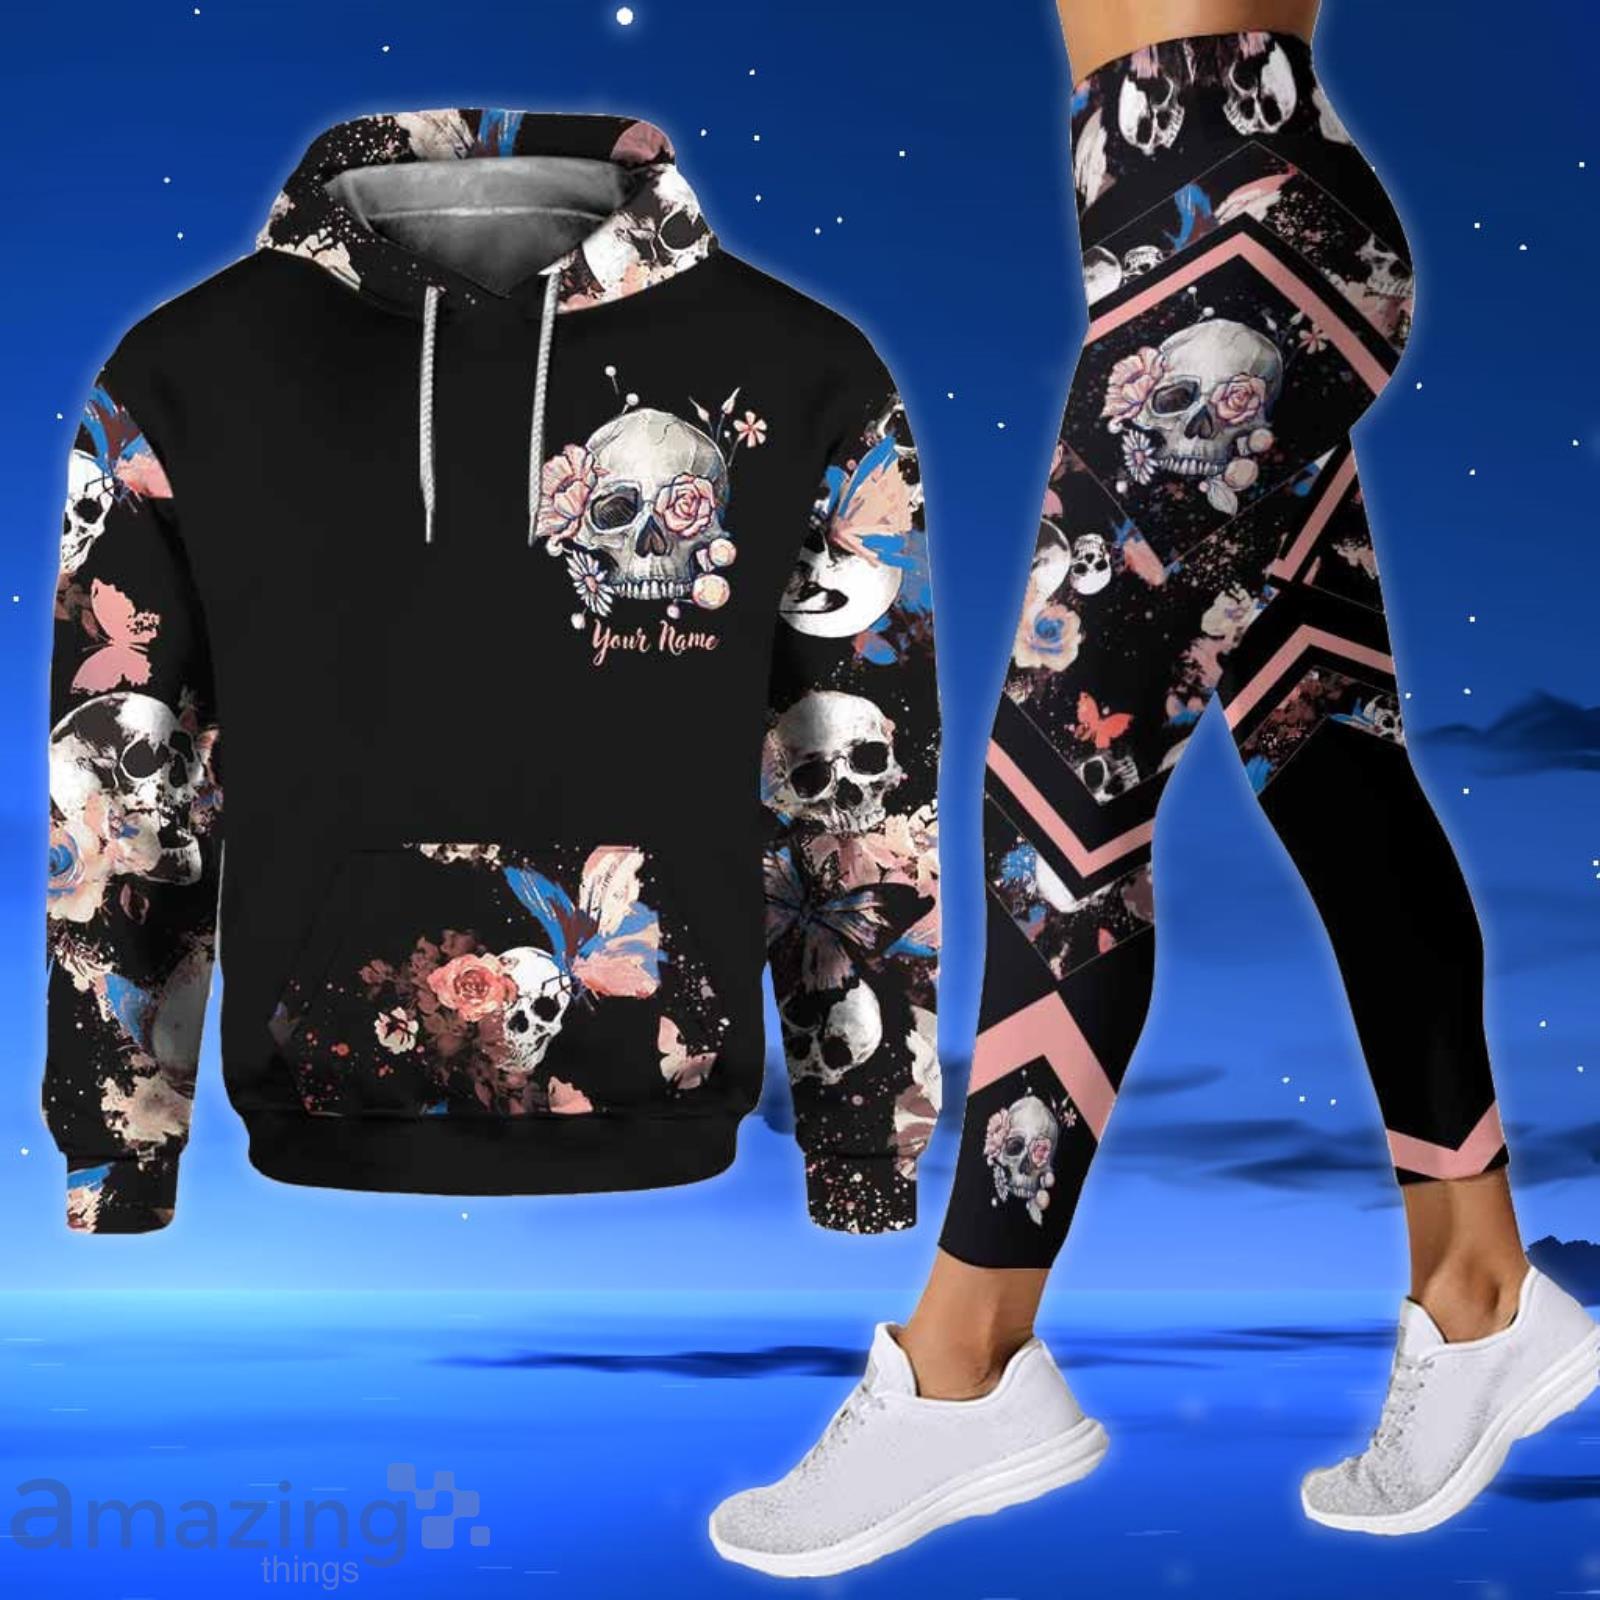 https://image.whatamazingthings.com/2023/03/custom-name-may-girl-with-tatoos-pretty-eyes-and-thick-thighs-black-all-over-print-3d-flower-skull-hoodie-and-leggings-1.jpg